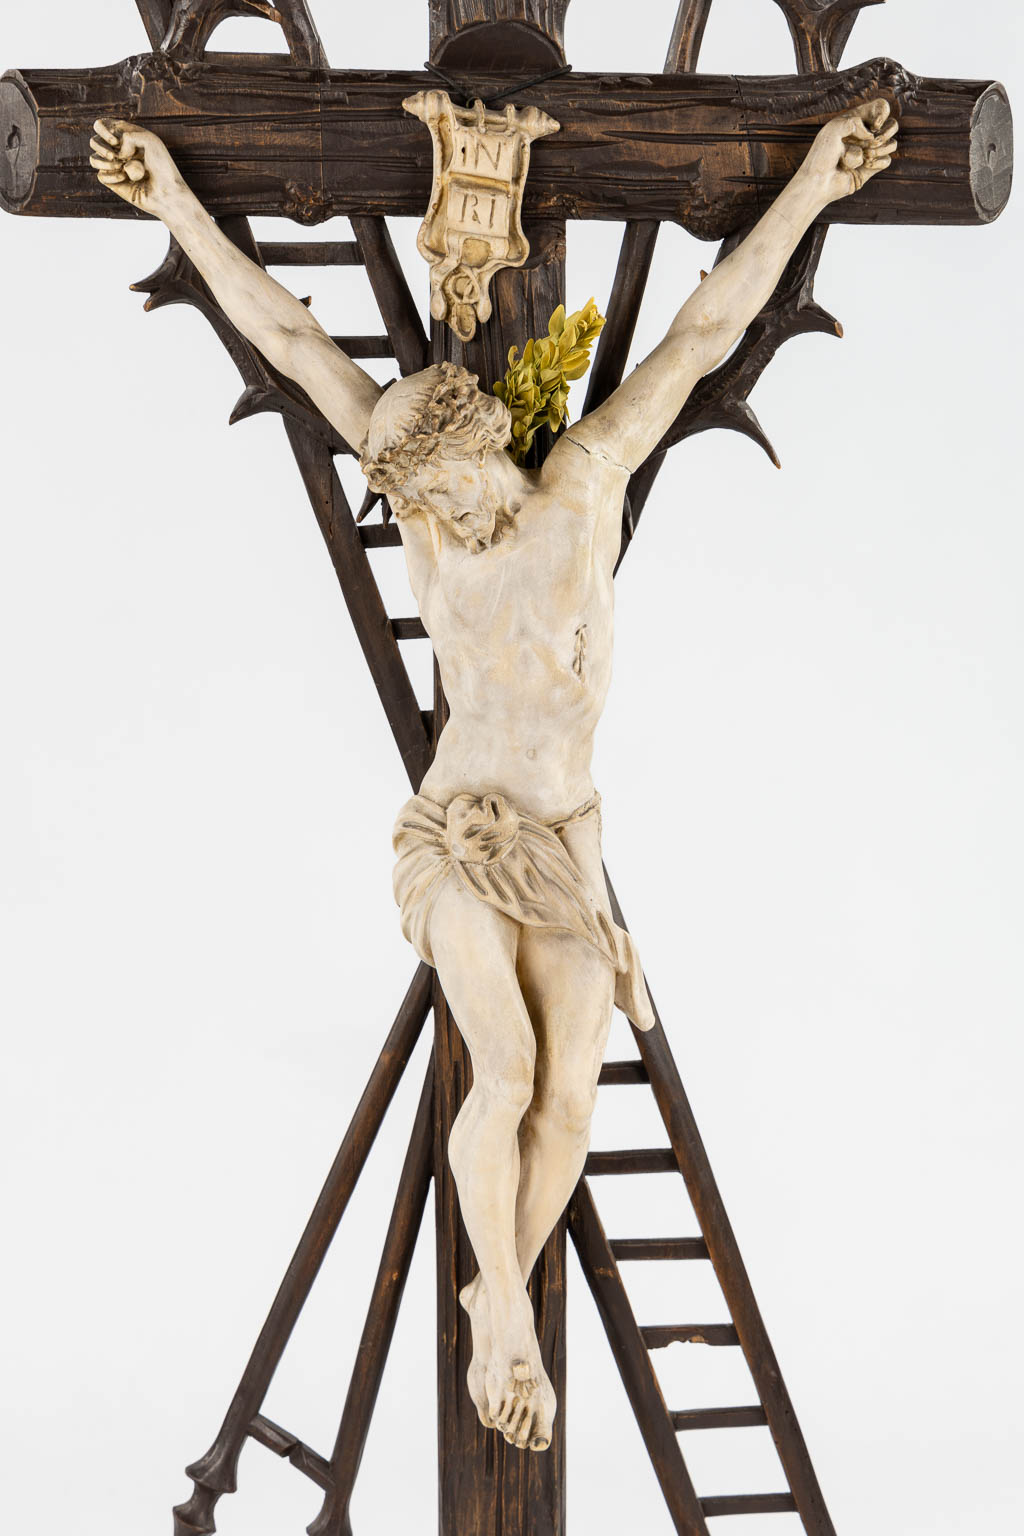 Three large crucifixes, sculptured wood and plaster. (W:46 x H:115 cm)